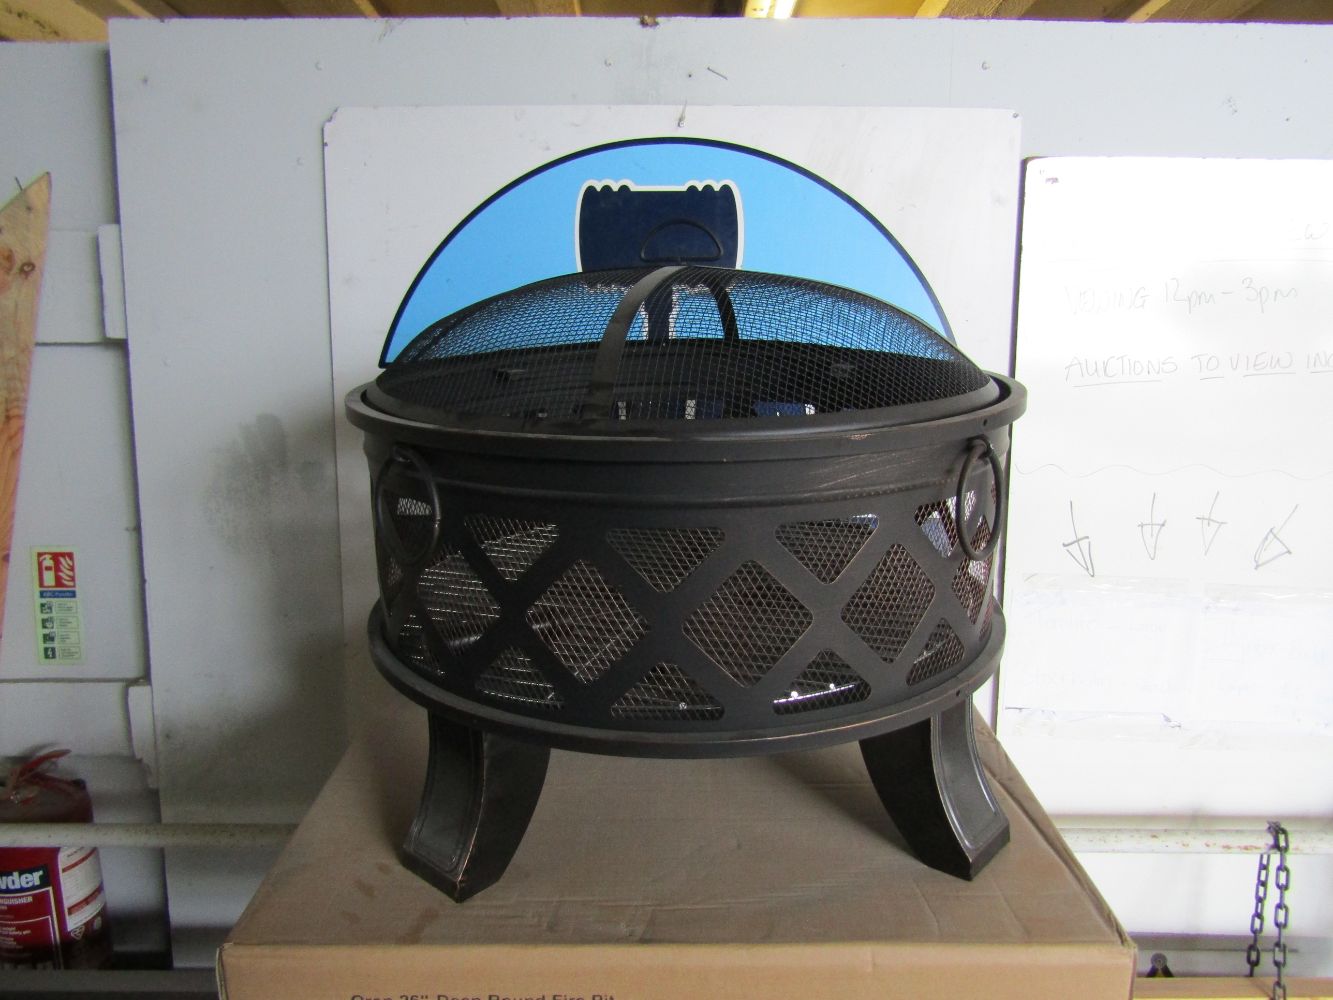 Last of the New Oren Fire Pits in single and bulk lots